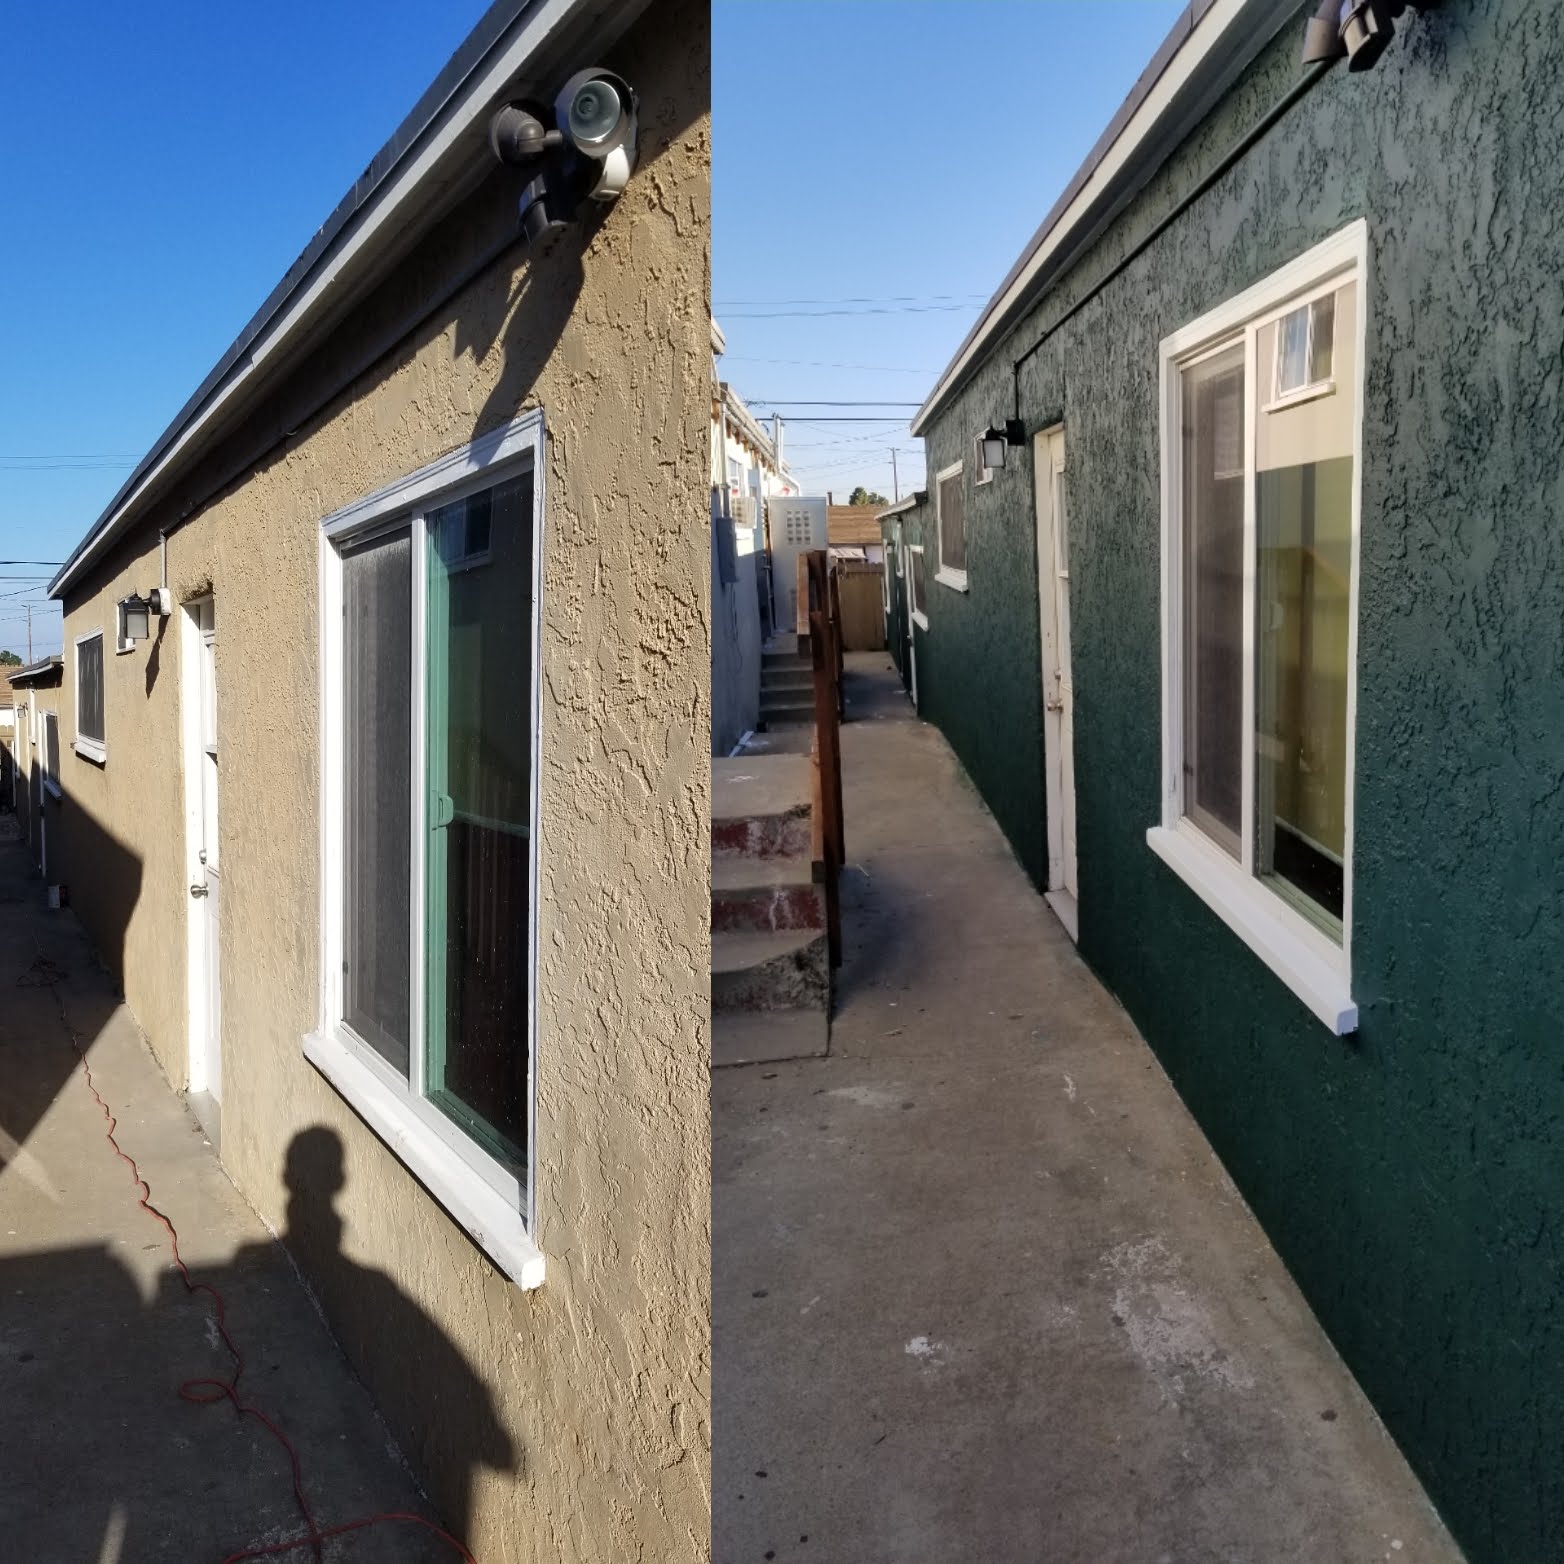 exterior house painting services